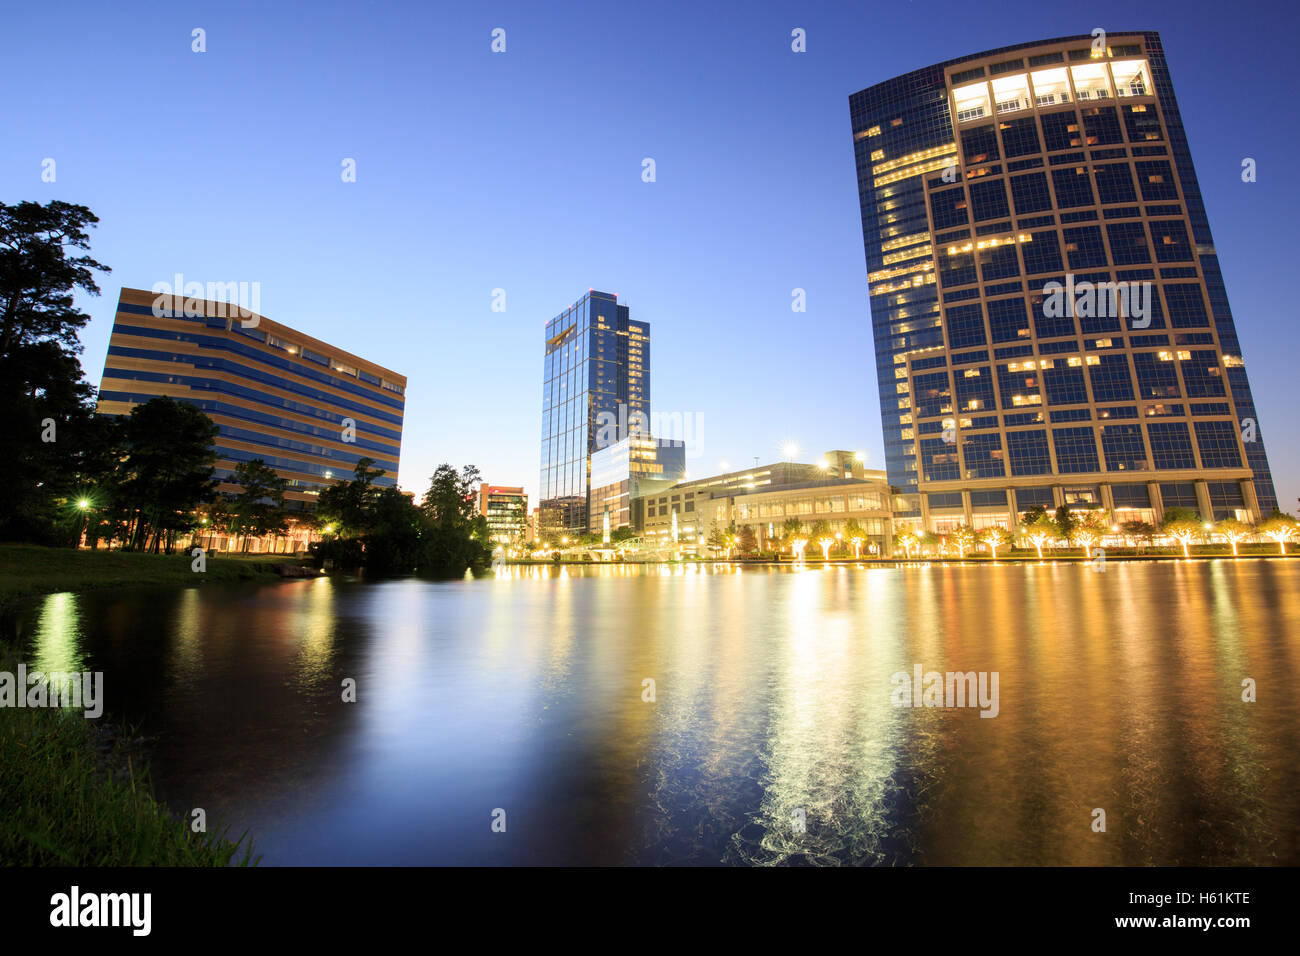 Night landscape building in Woodlands area, Houston, Texas Stock Photo